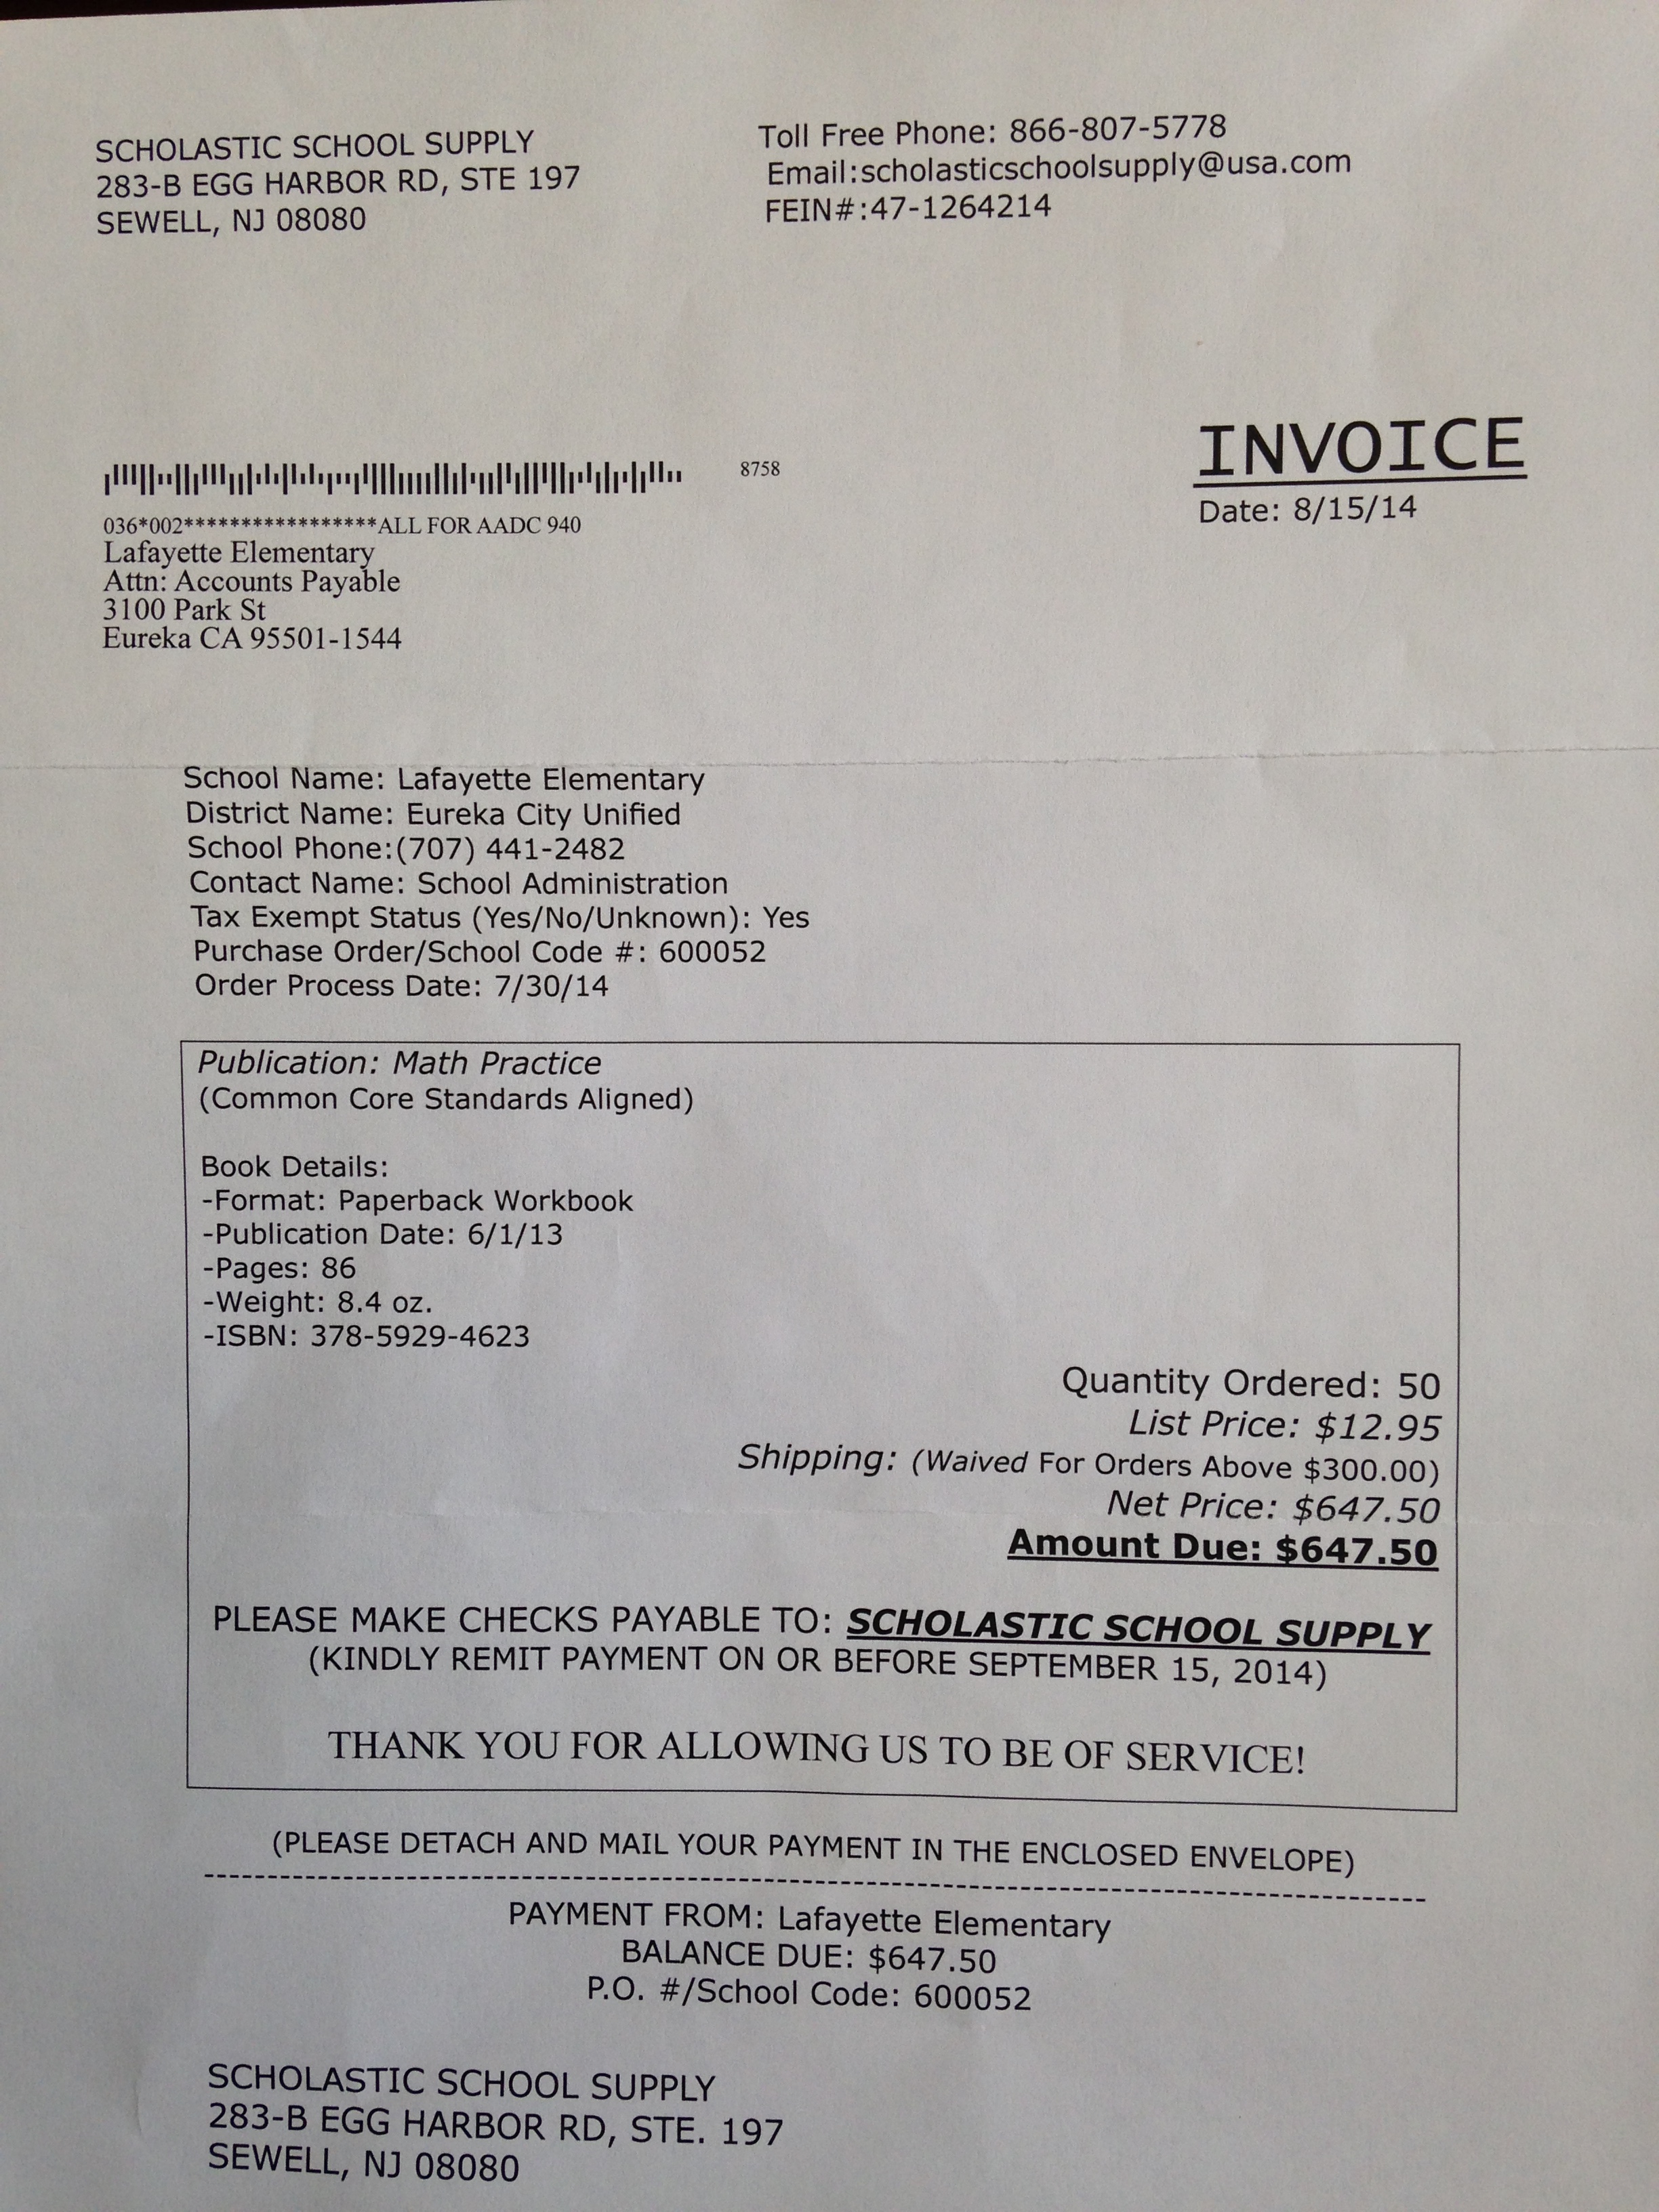 Picture of the phony invoice